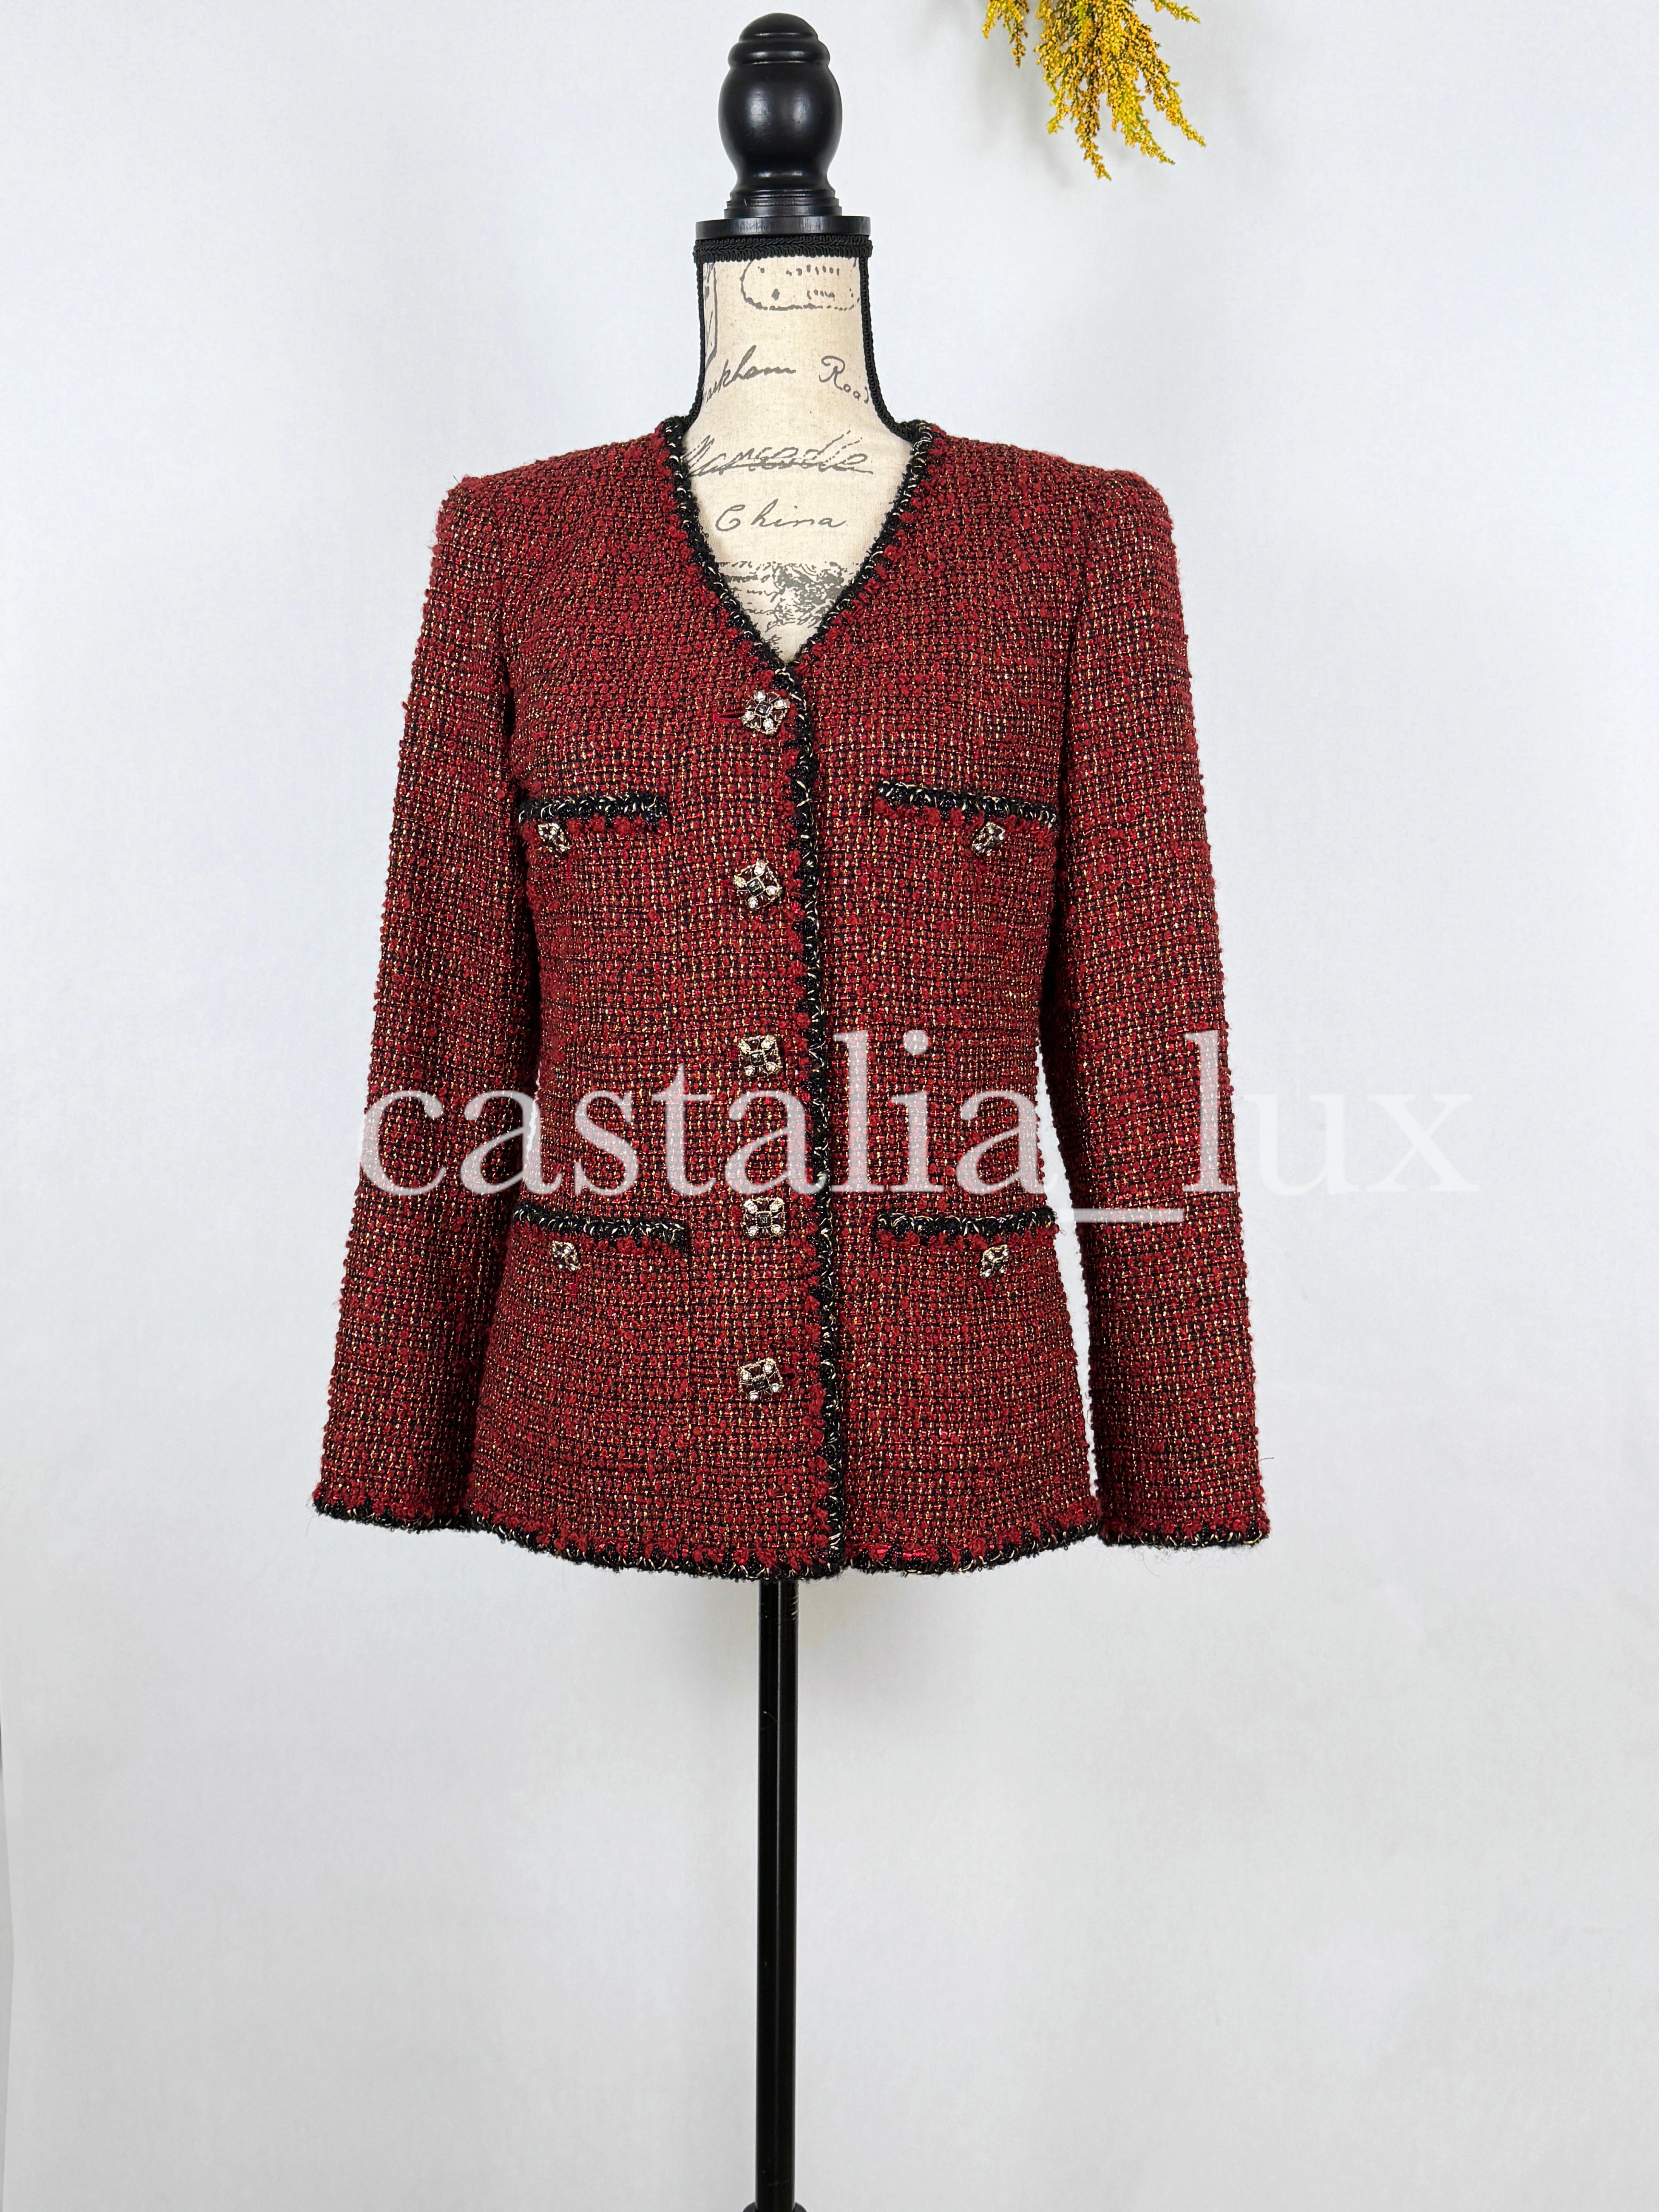 Chanel New Iconic CC Jewel Buttons Lesage Tweed Jacket 8